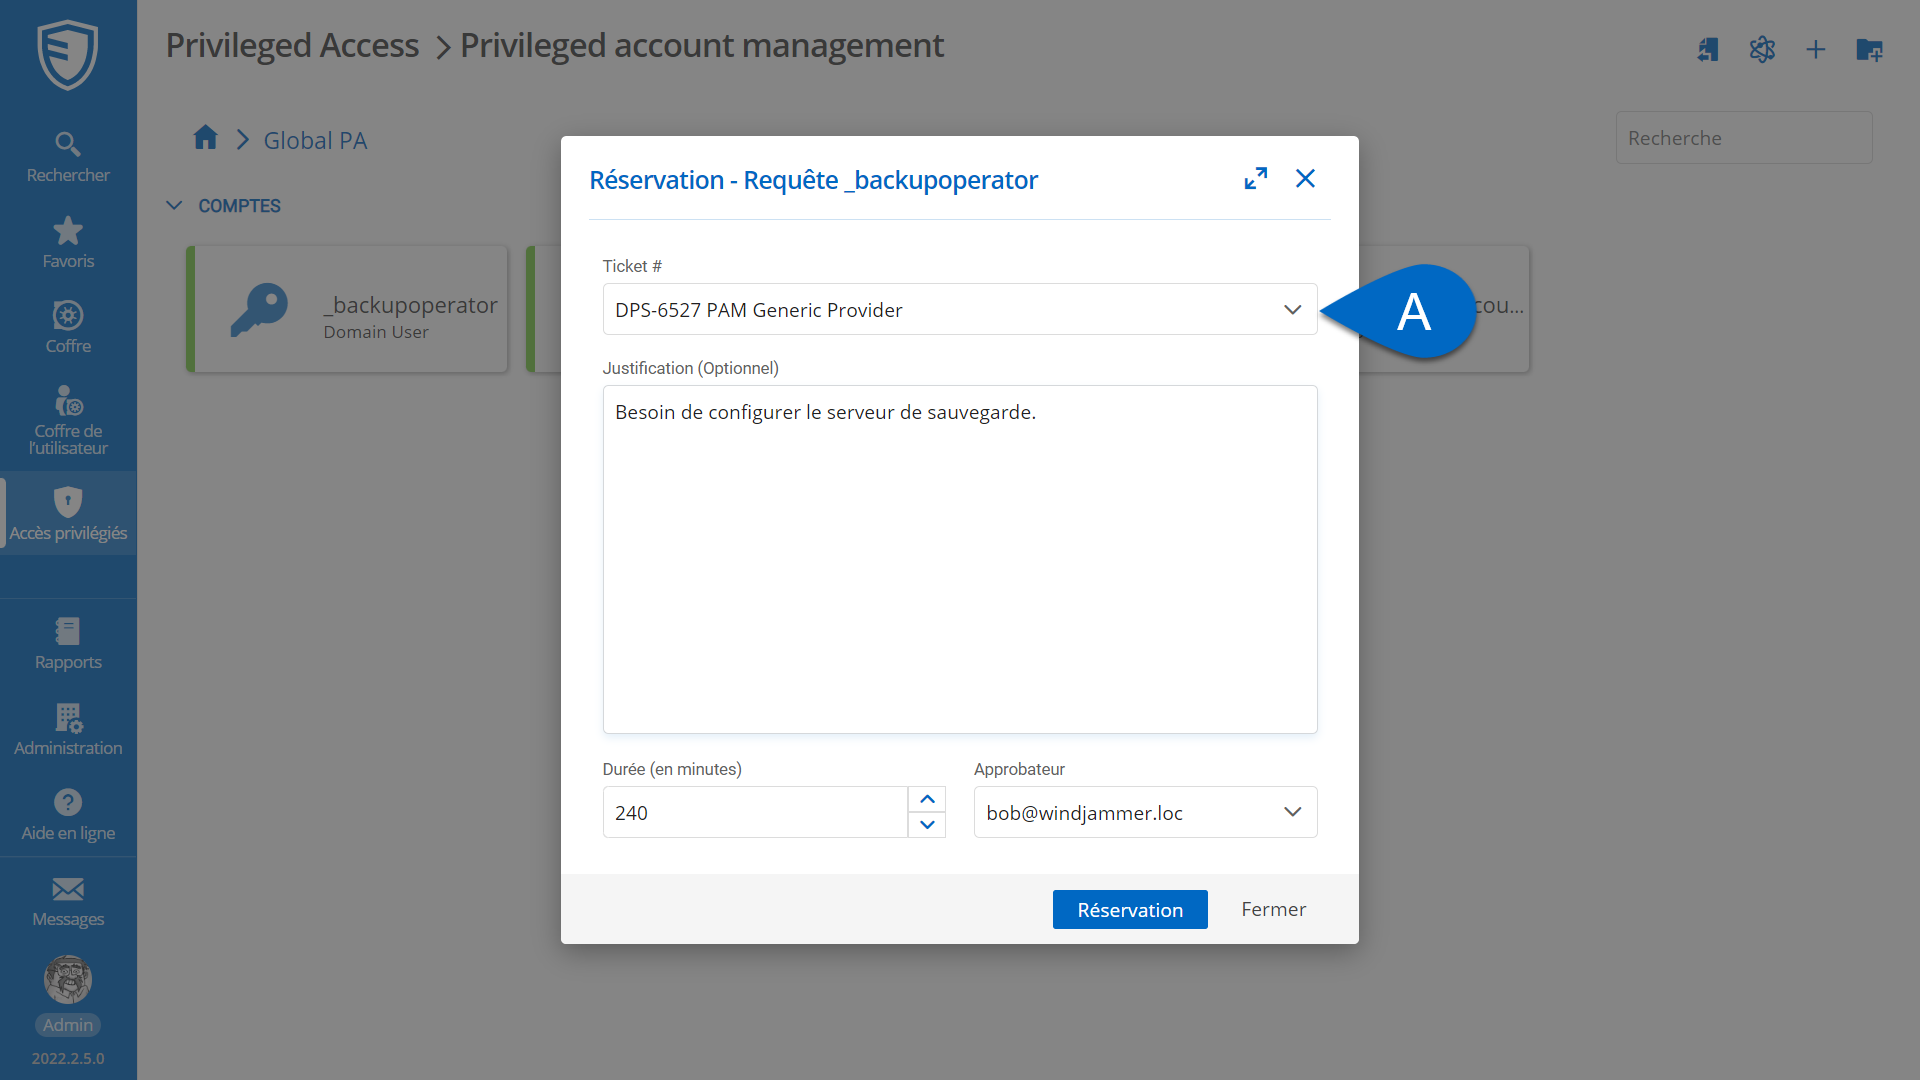 FR Jira Ticketing Service Integration at Checkout of Privileged Accounts.png